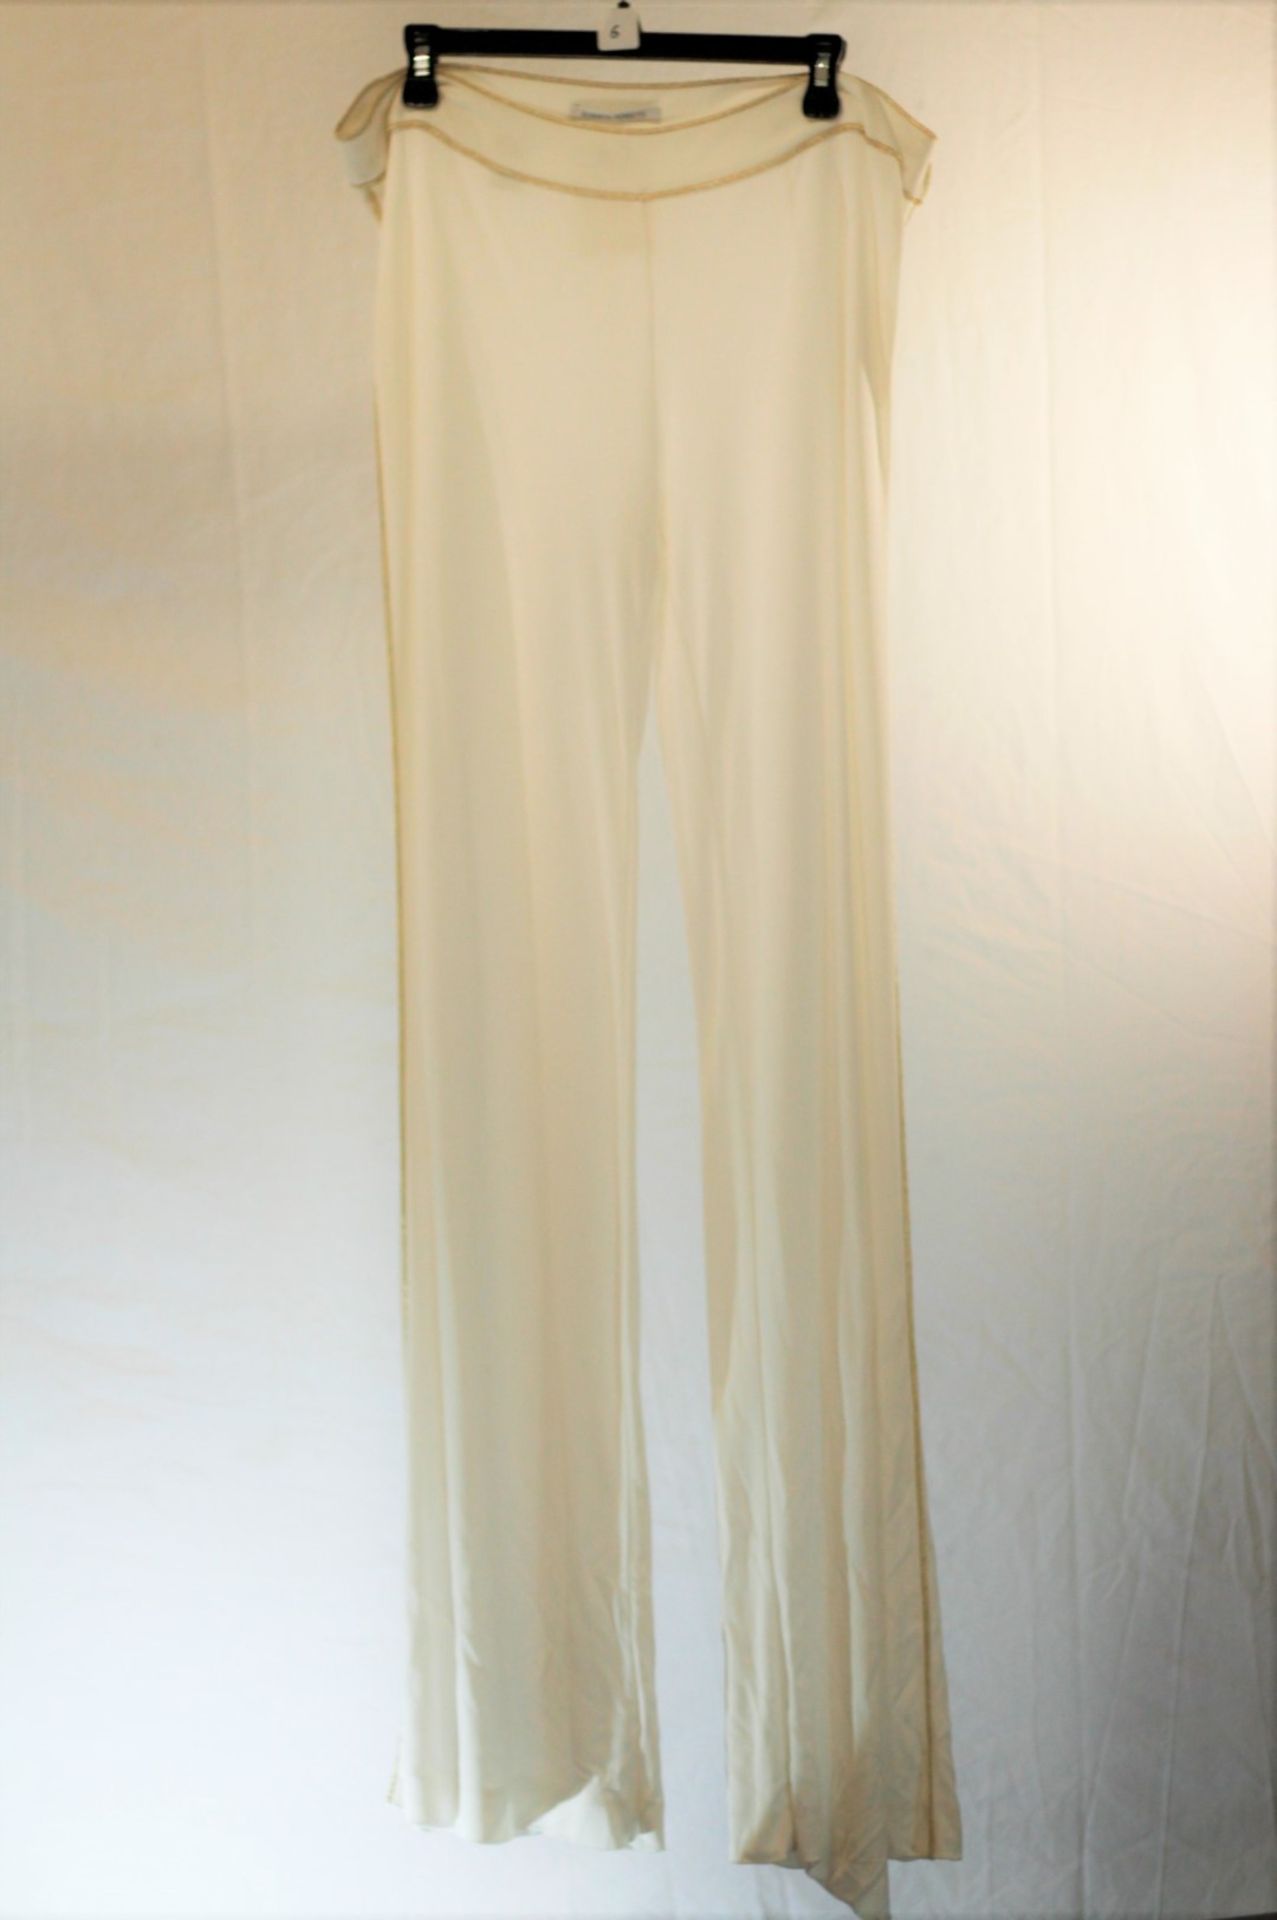 1 x Alberta Ferretti White Trousers - Size: 16 - Material: 100% Rayon - From a High End Clothing - Image 6 of 6